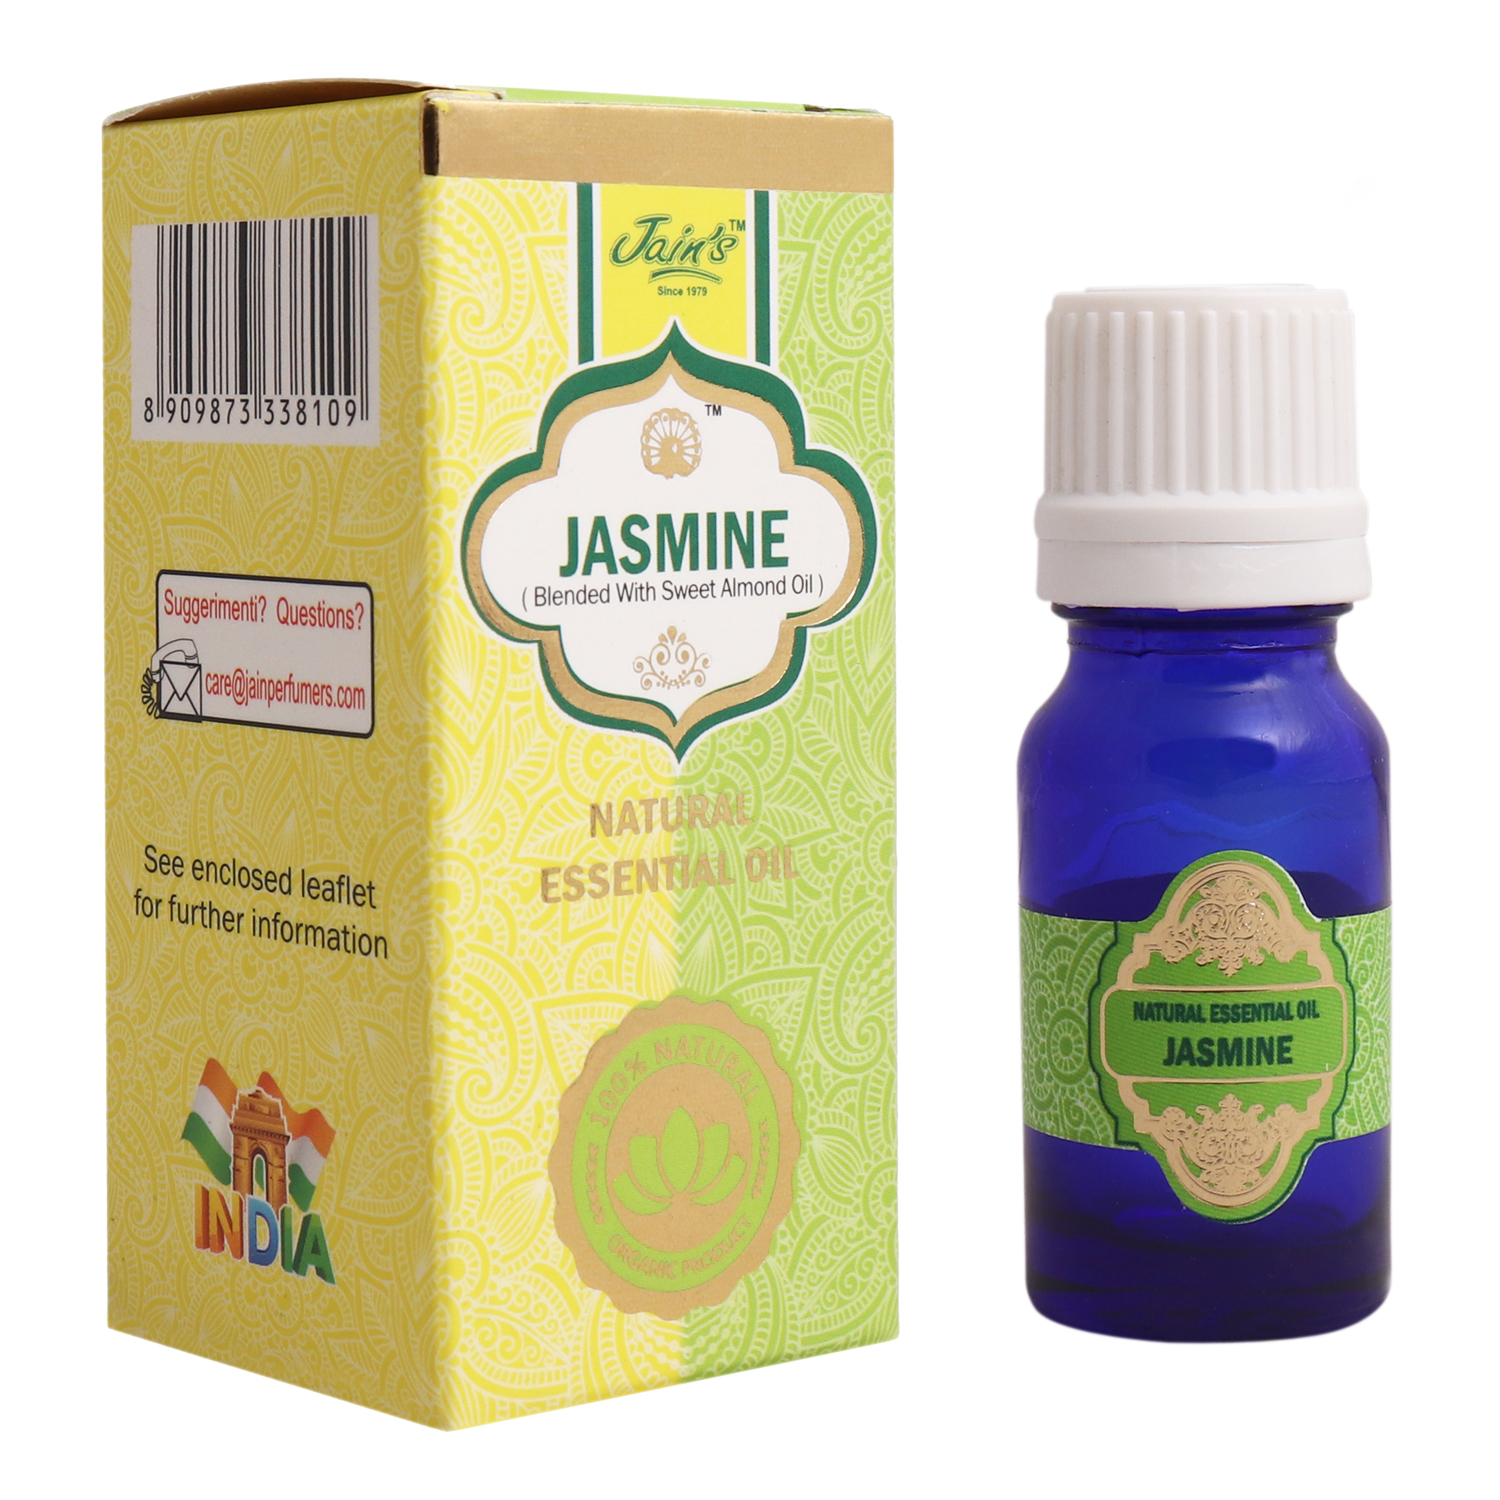 JASMINE (BLENDED WITH SWEET ALMOND) OIL